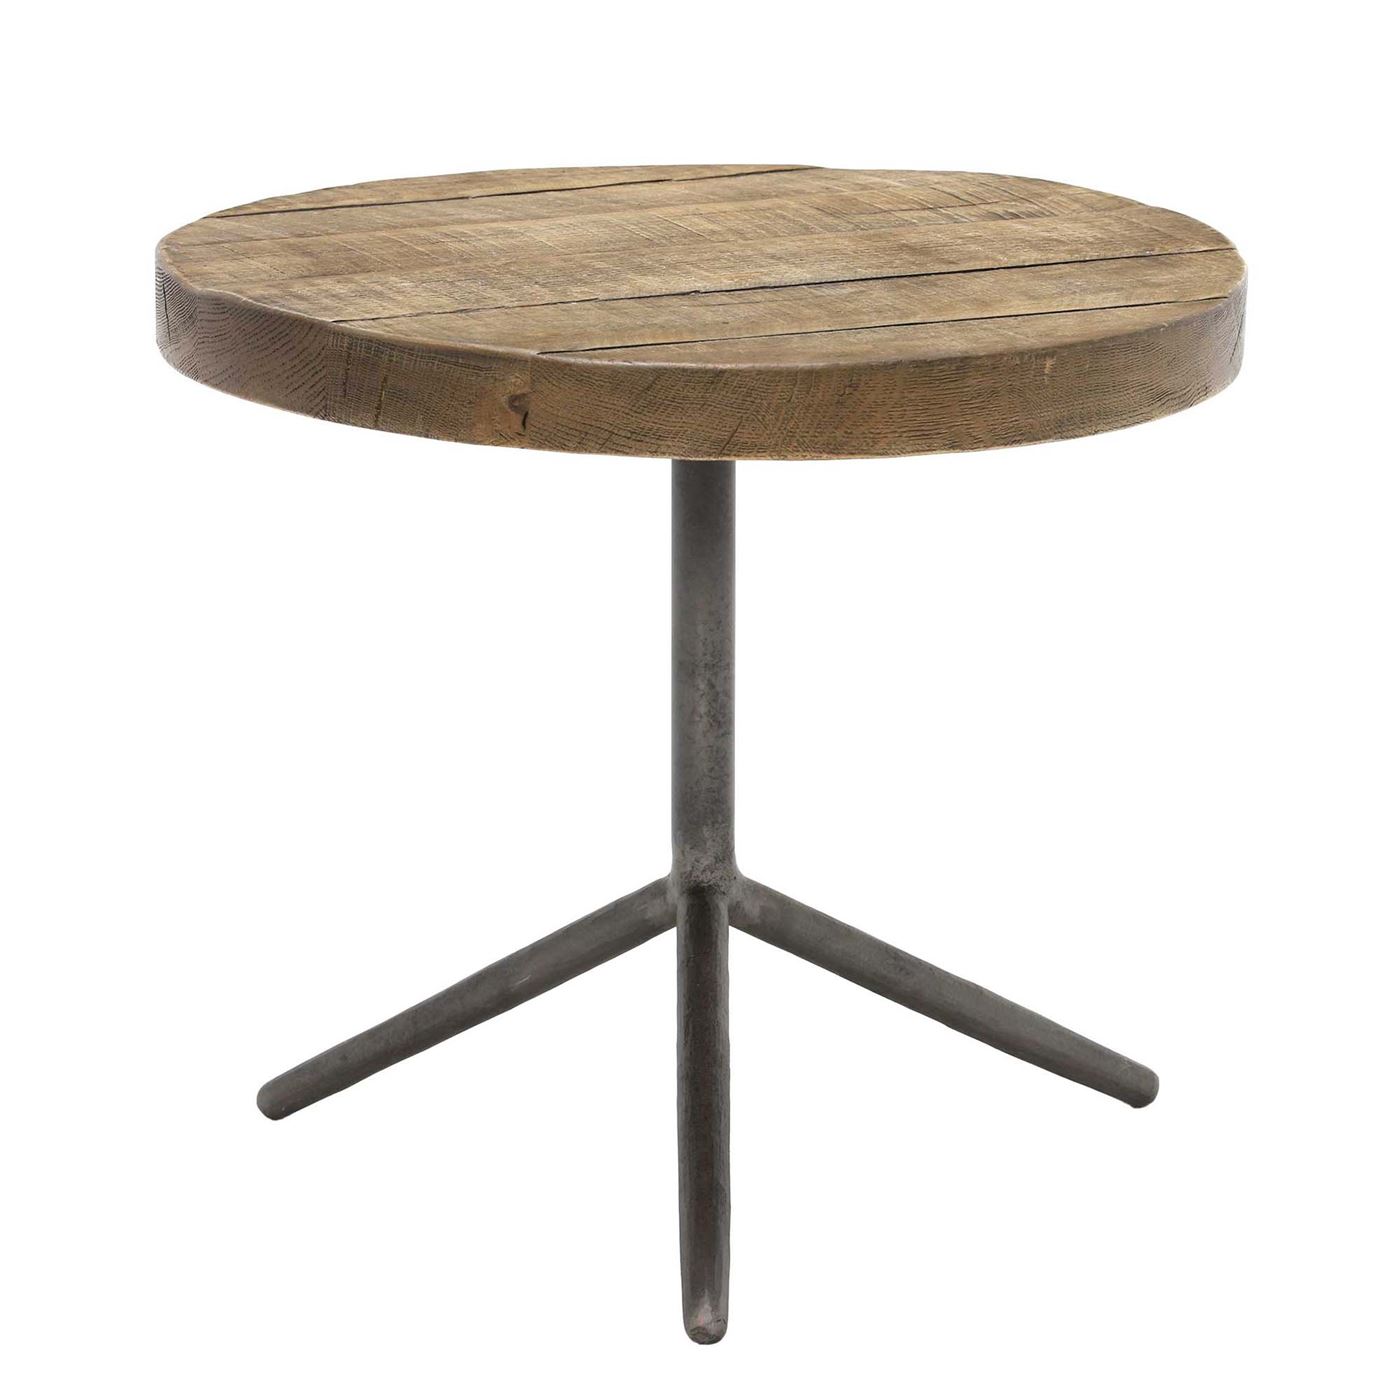 Keeler Circular Occasional Table 50x45cm, Brown | Barker & Stonehouse